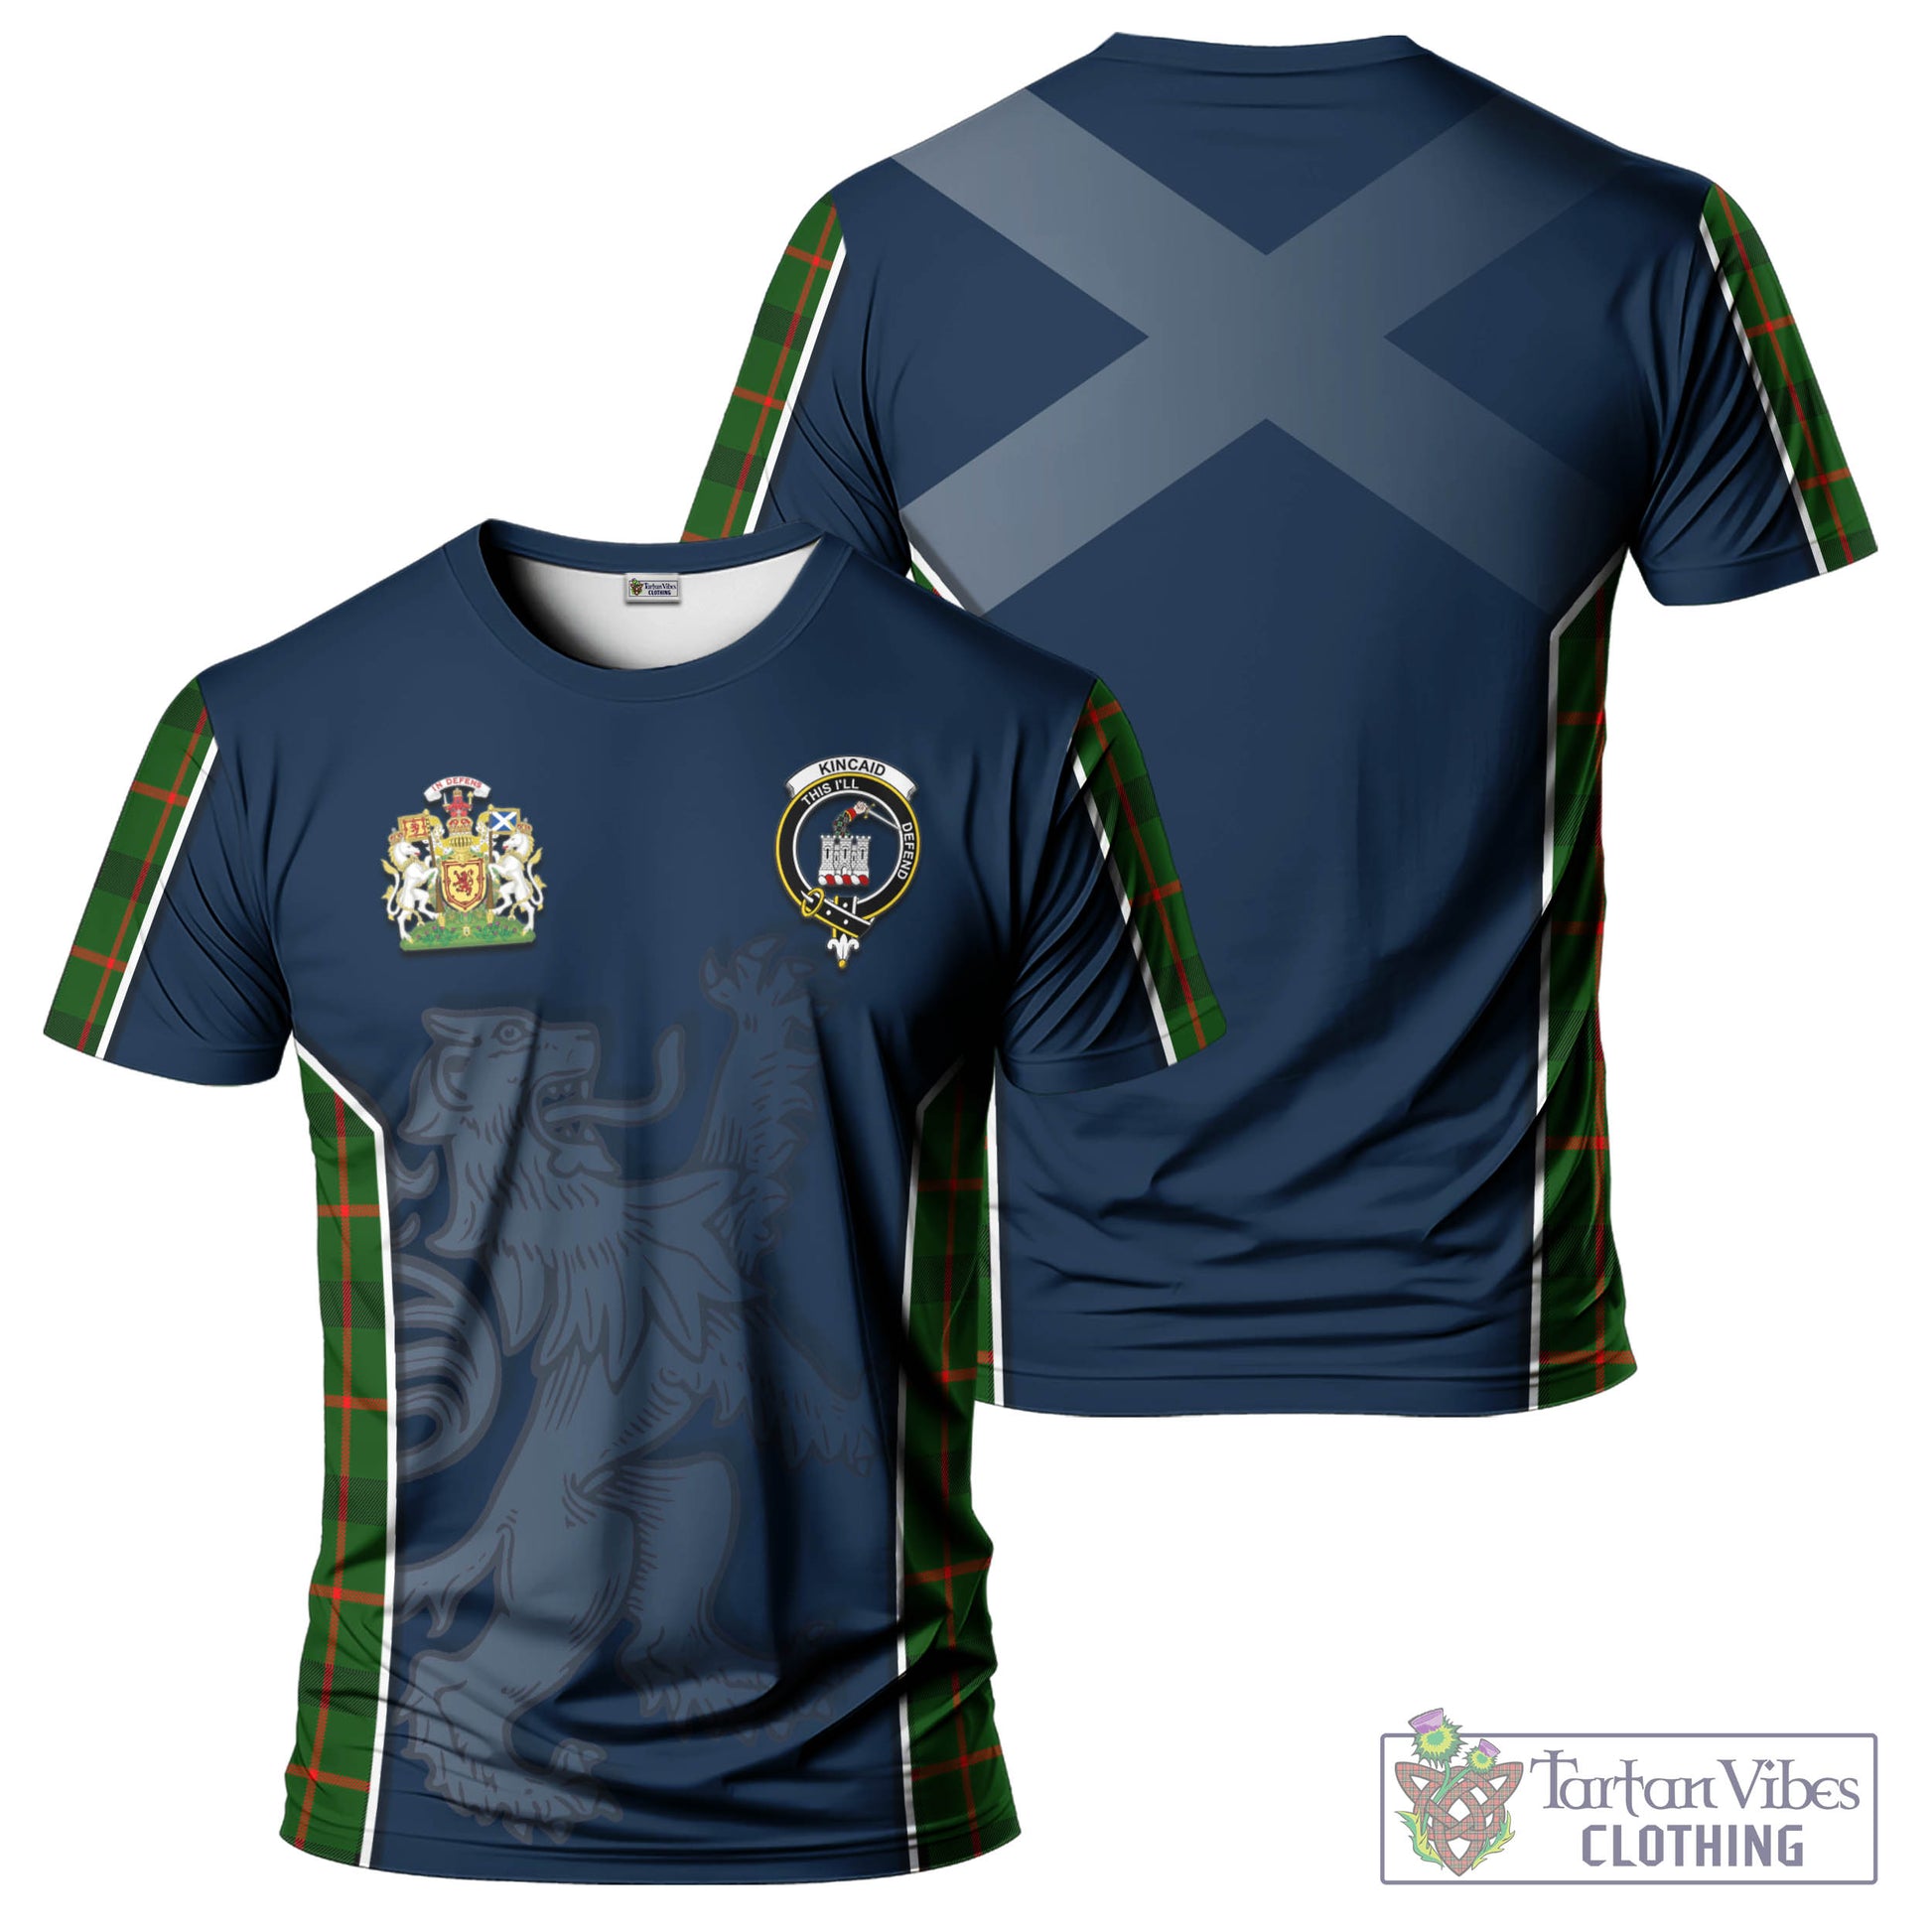 Tartan Vibes Clothing Kincaid Modern Tartan T-Shirt with Family Crest and Lion Rampant Vibes Sport Style